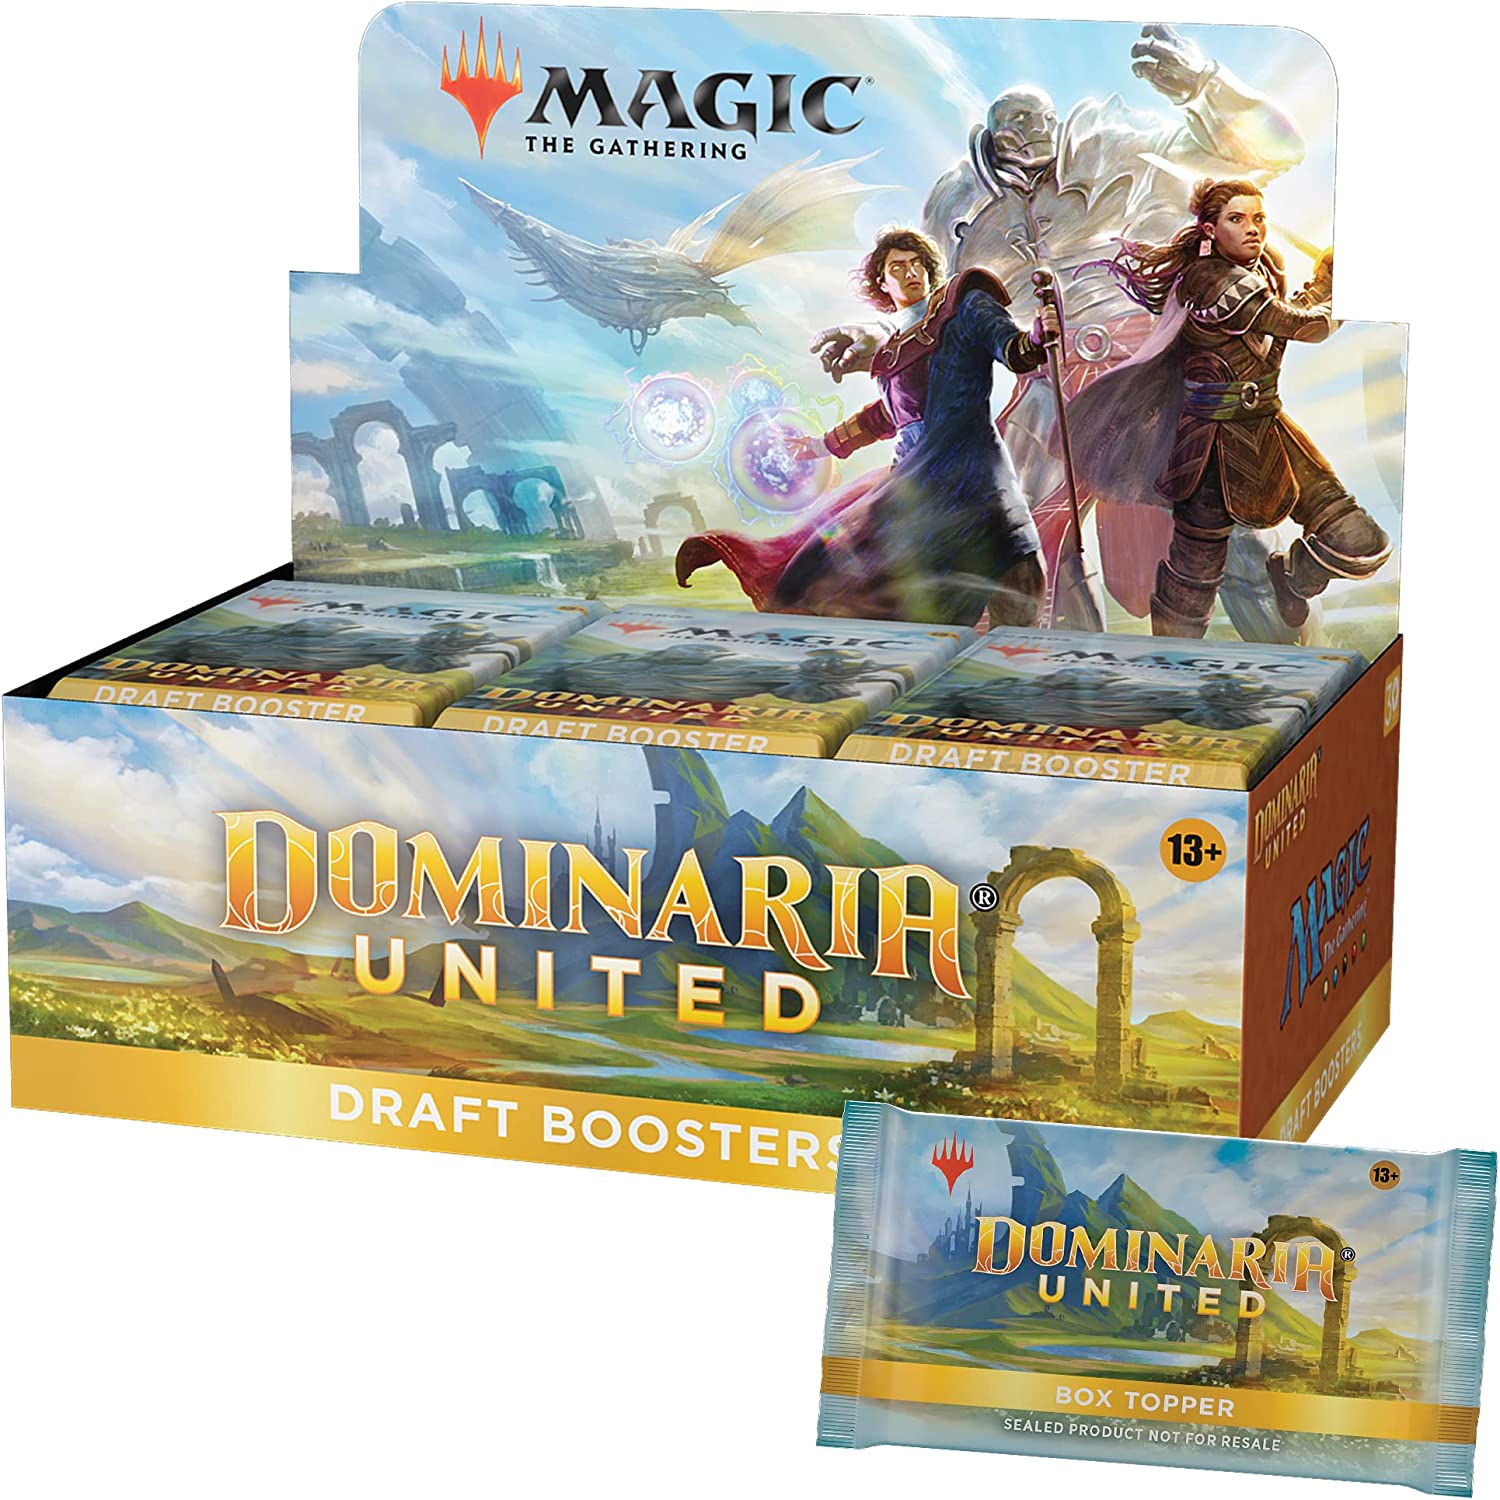 Magic: The Gathering Dominaria United Draft Booster Box | CCGPrime